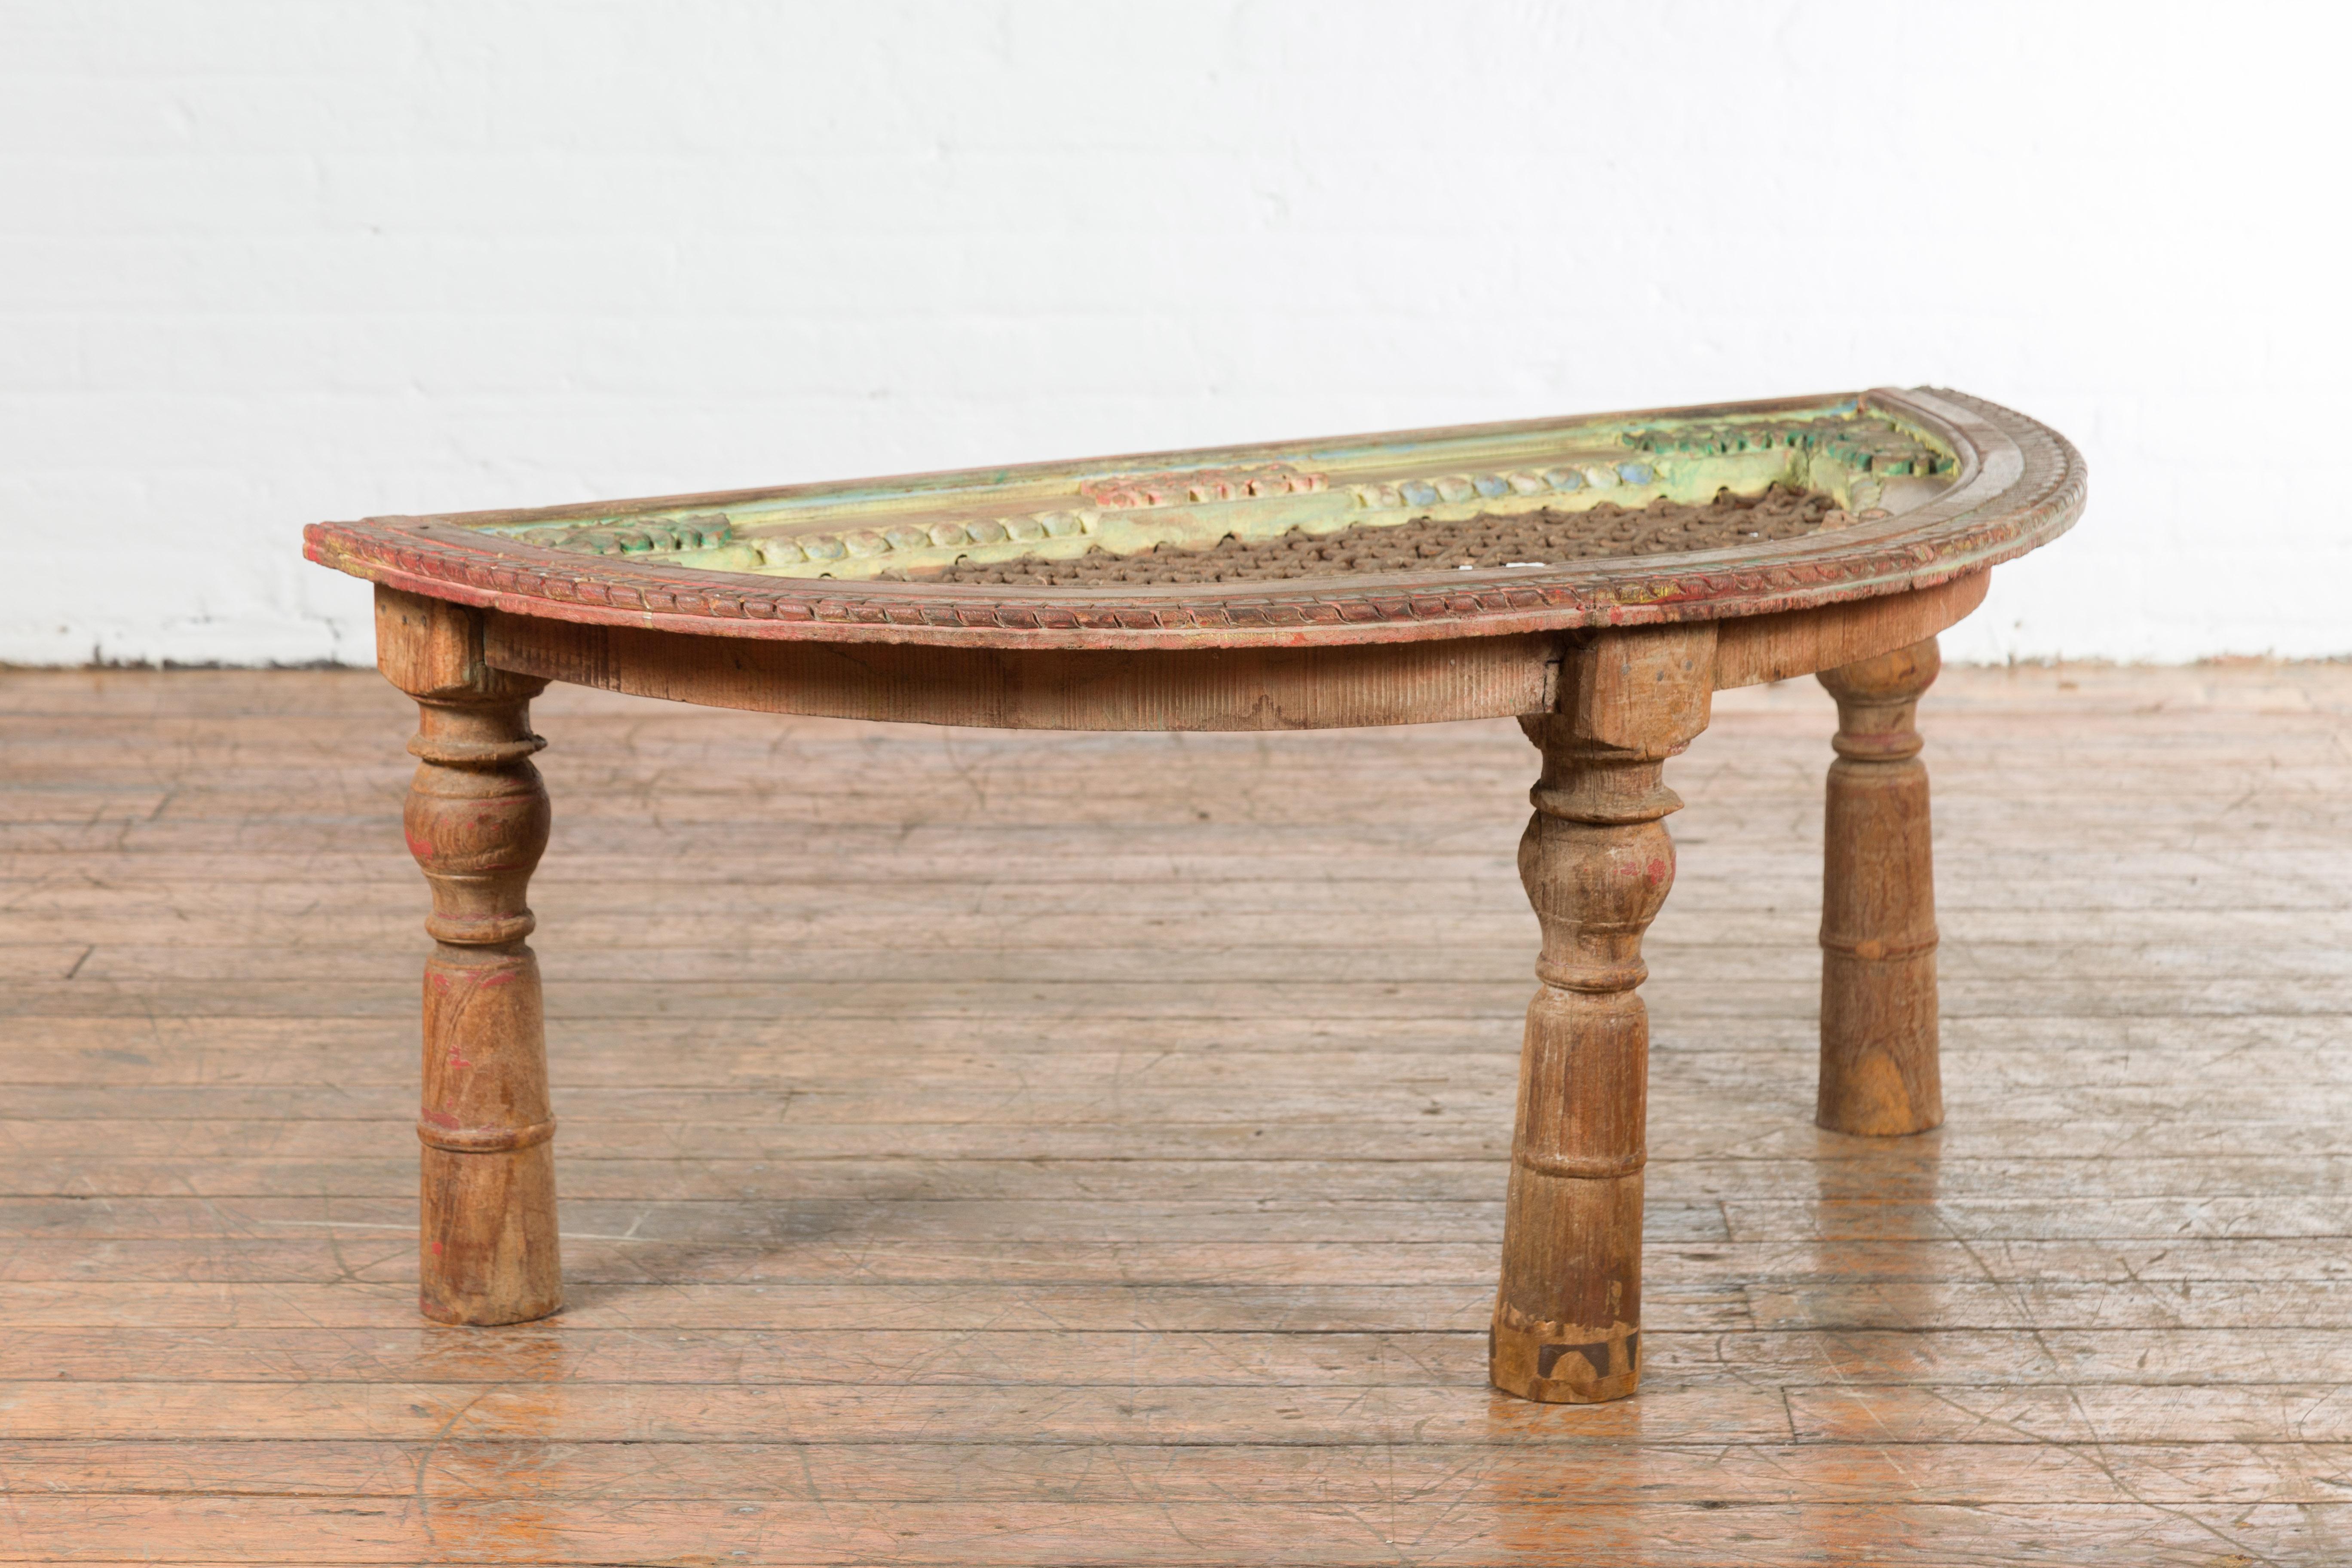 Indian 19th Century Sheesham Wood Low Demilune Table with Window Grate Iron Top For Sale 10